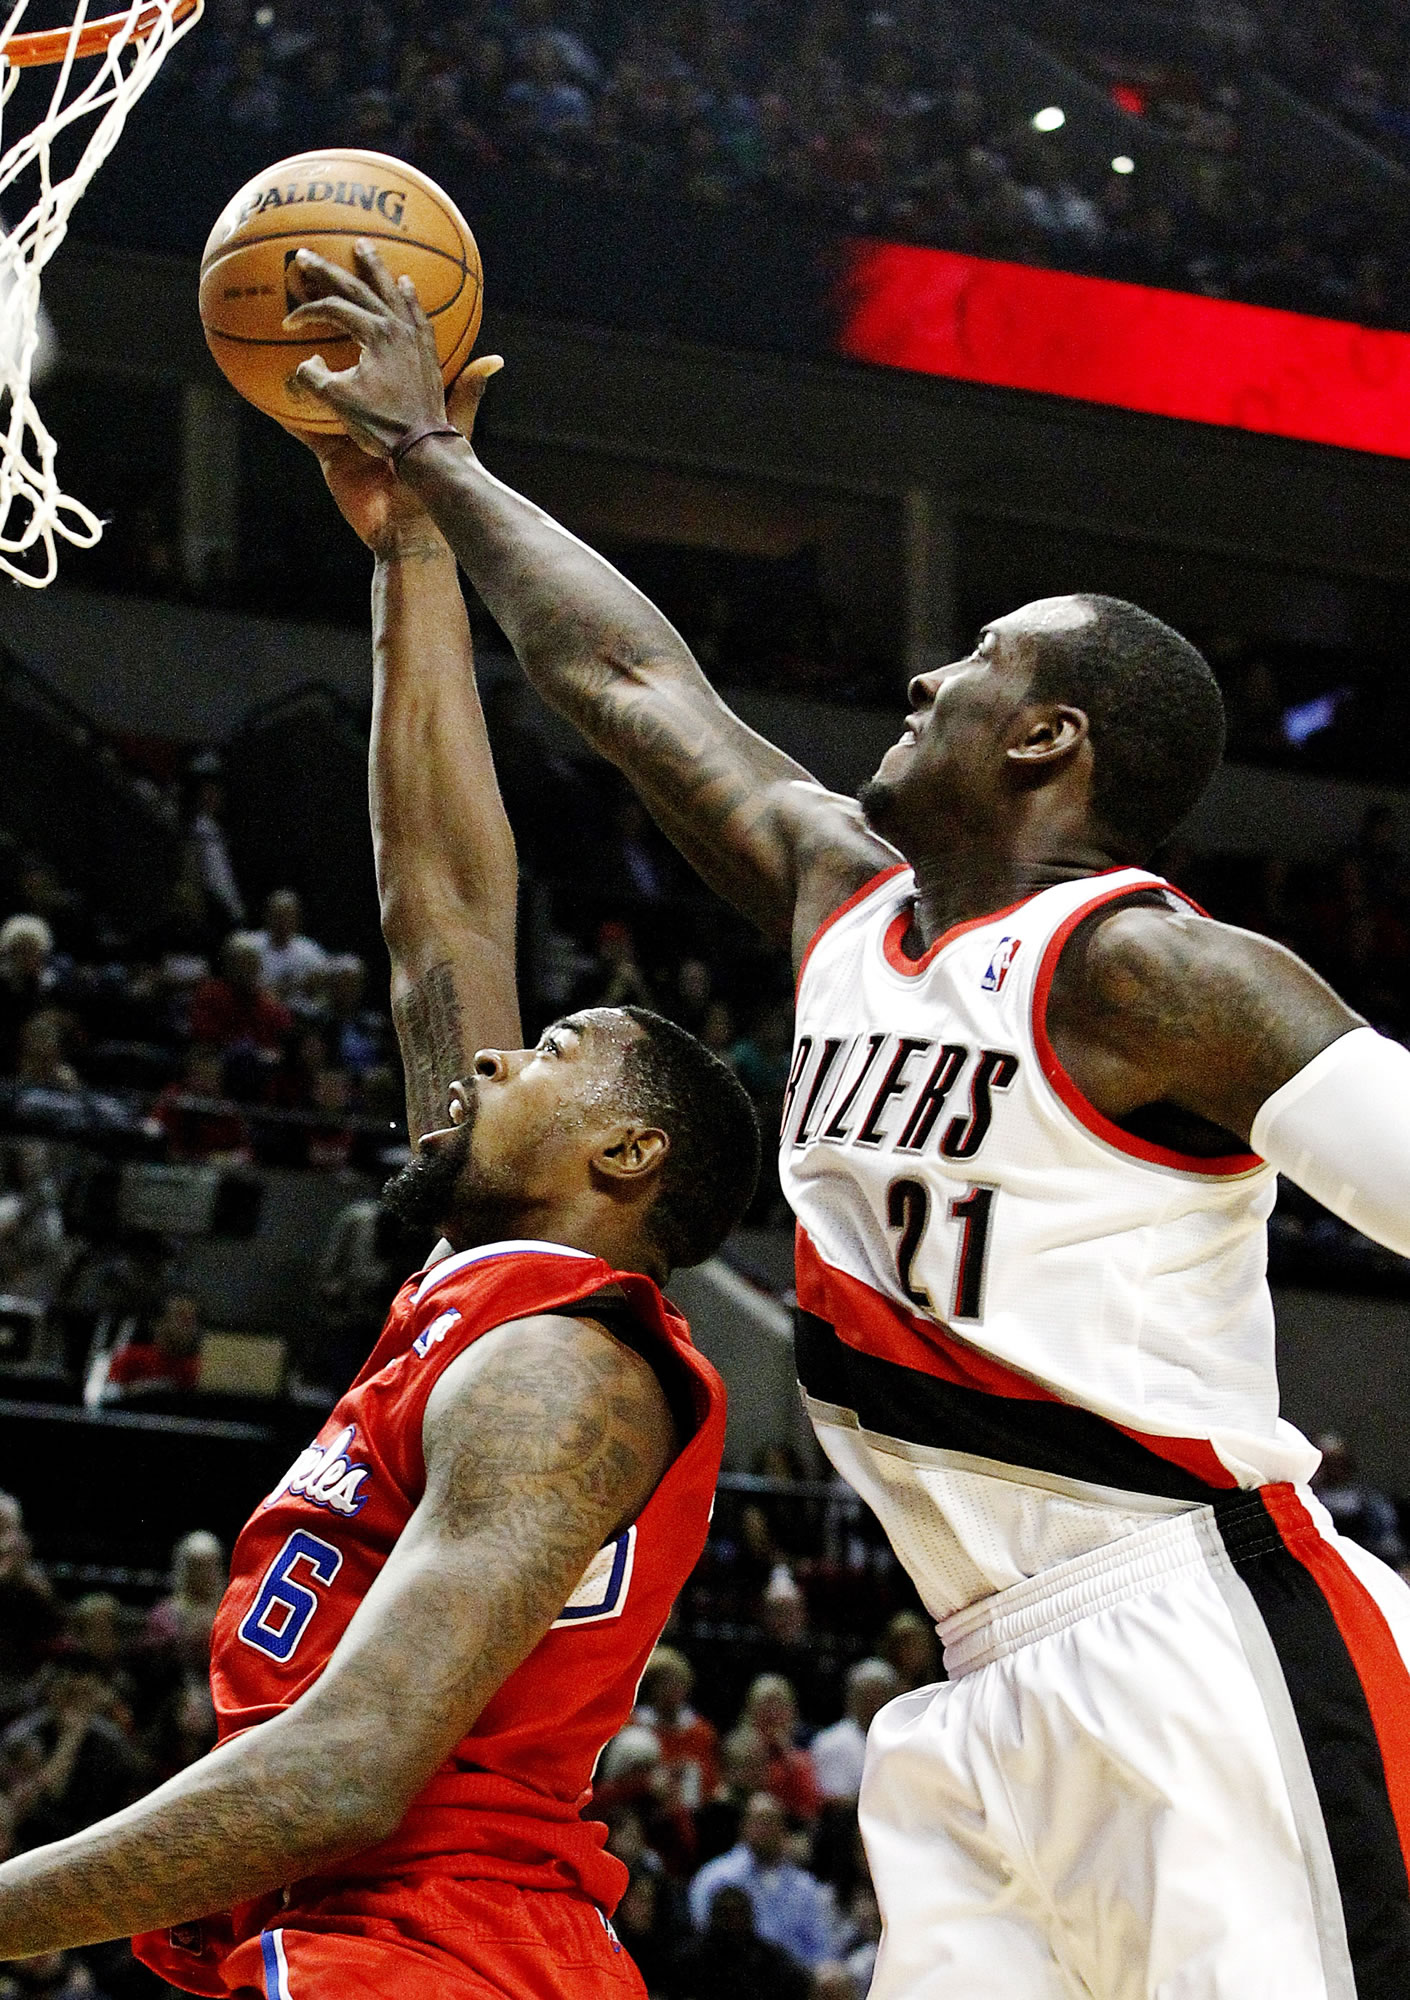 Trail Blazers center J.J. Hickson blocks a shot from the Clippers' DeAndre Jordan, but Portland couldn't muster enough defense to pull out a comeback victory.